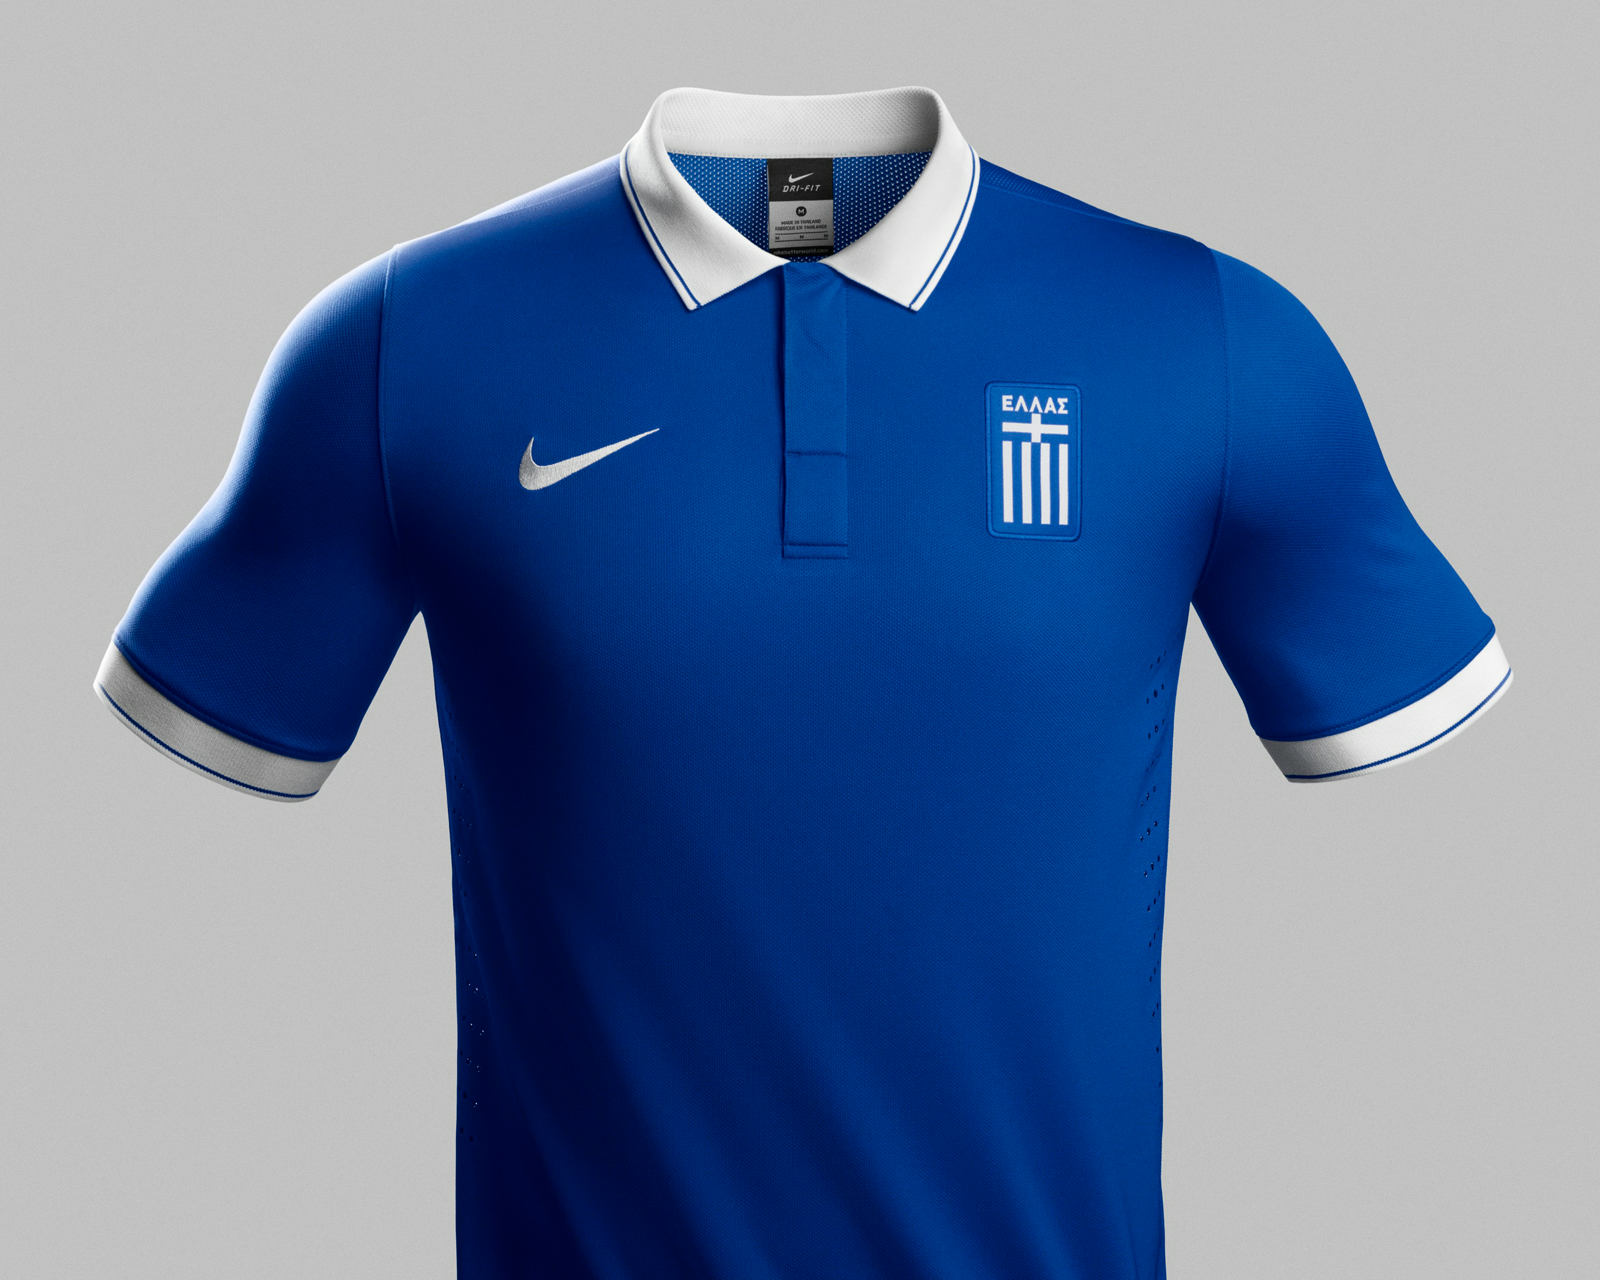 Greece 2014 World Cup Home and Away Kits Released - Footy Headlines